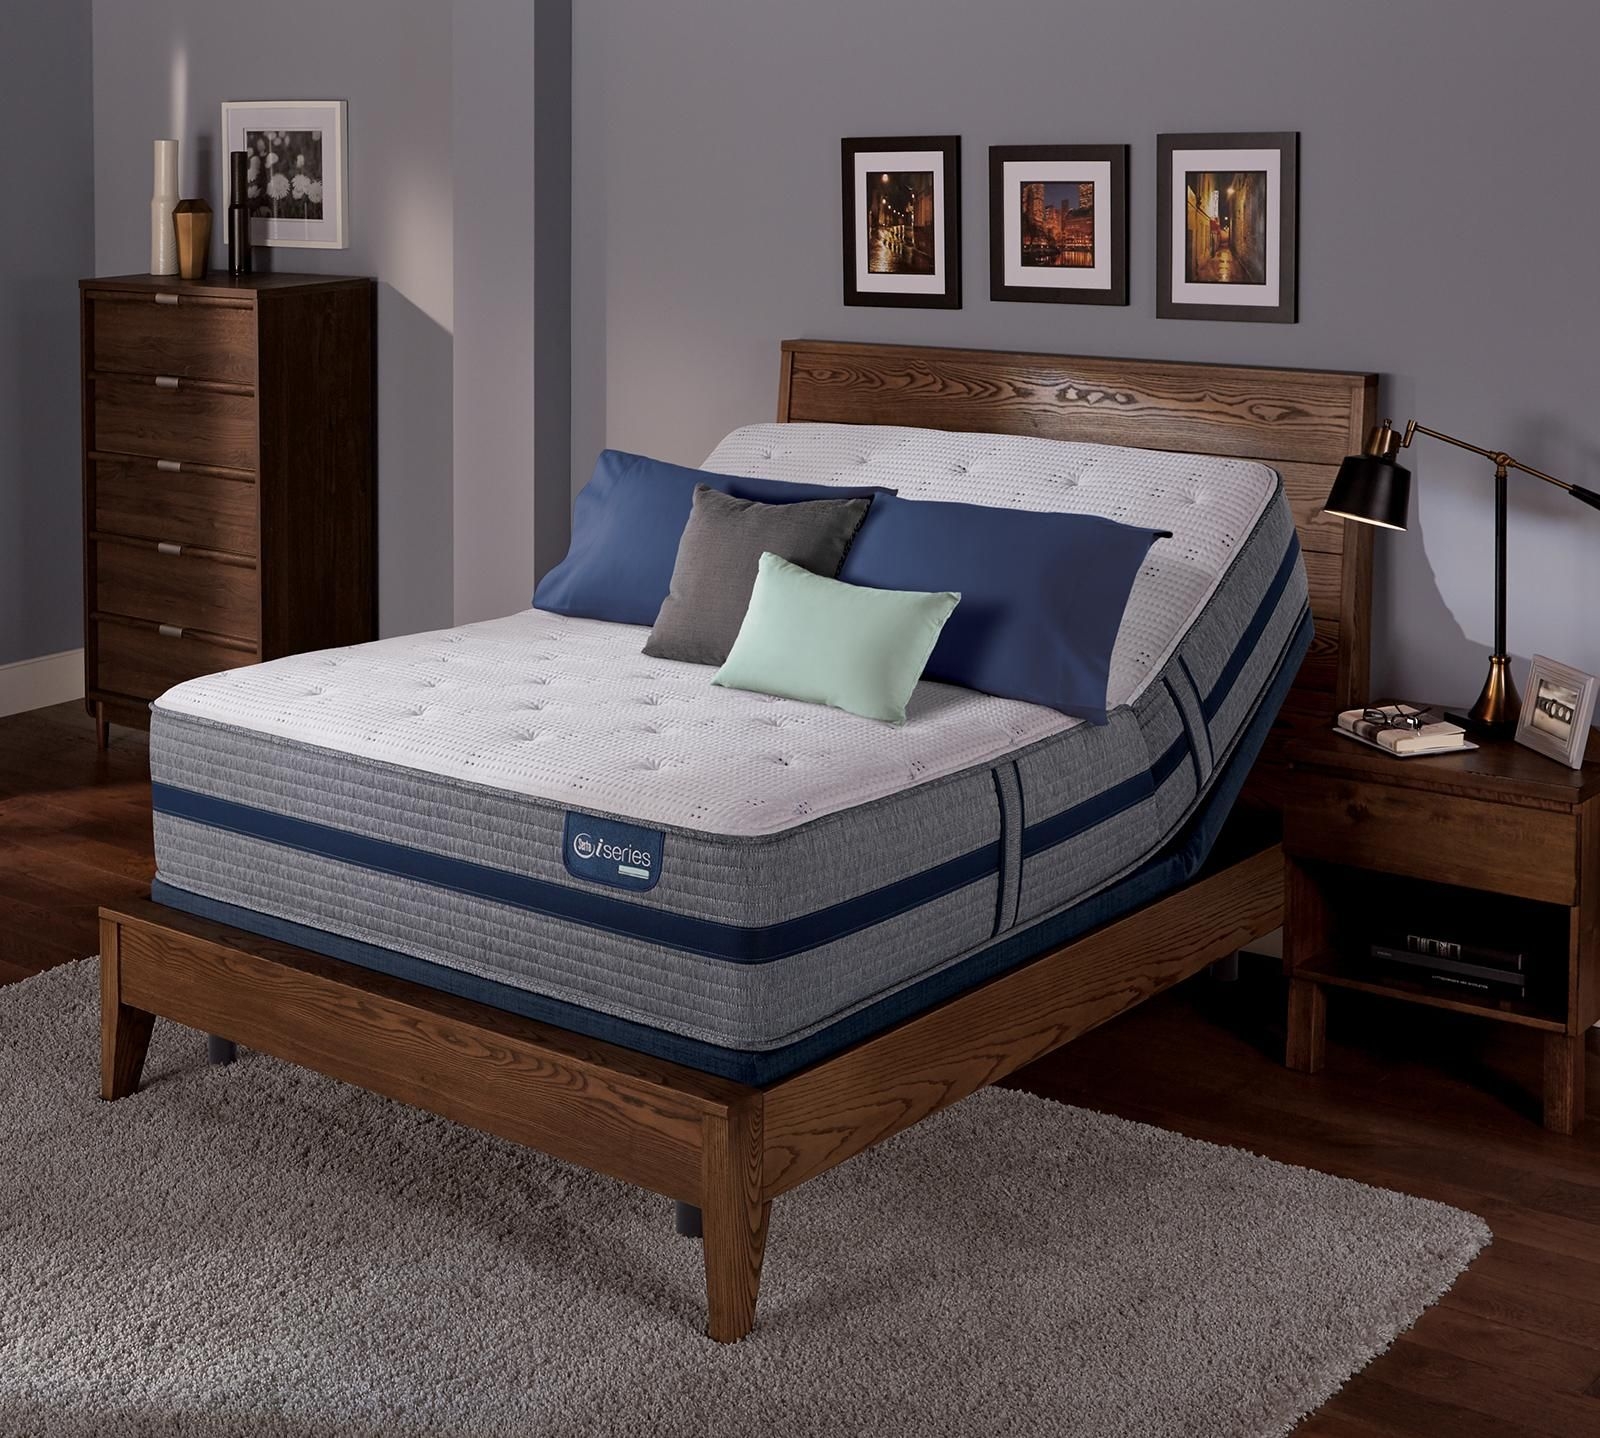 Headboards For Adjustable Beds Visualhunt, Can You Use A Headboard With An Adjustable Base Bed